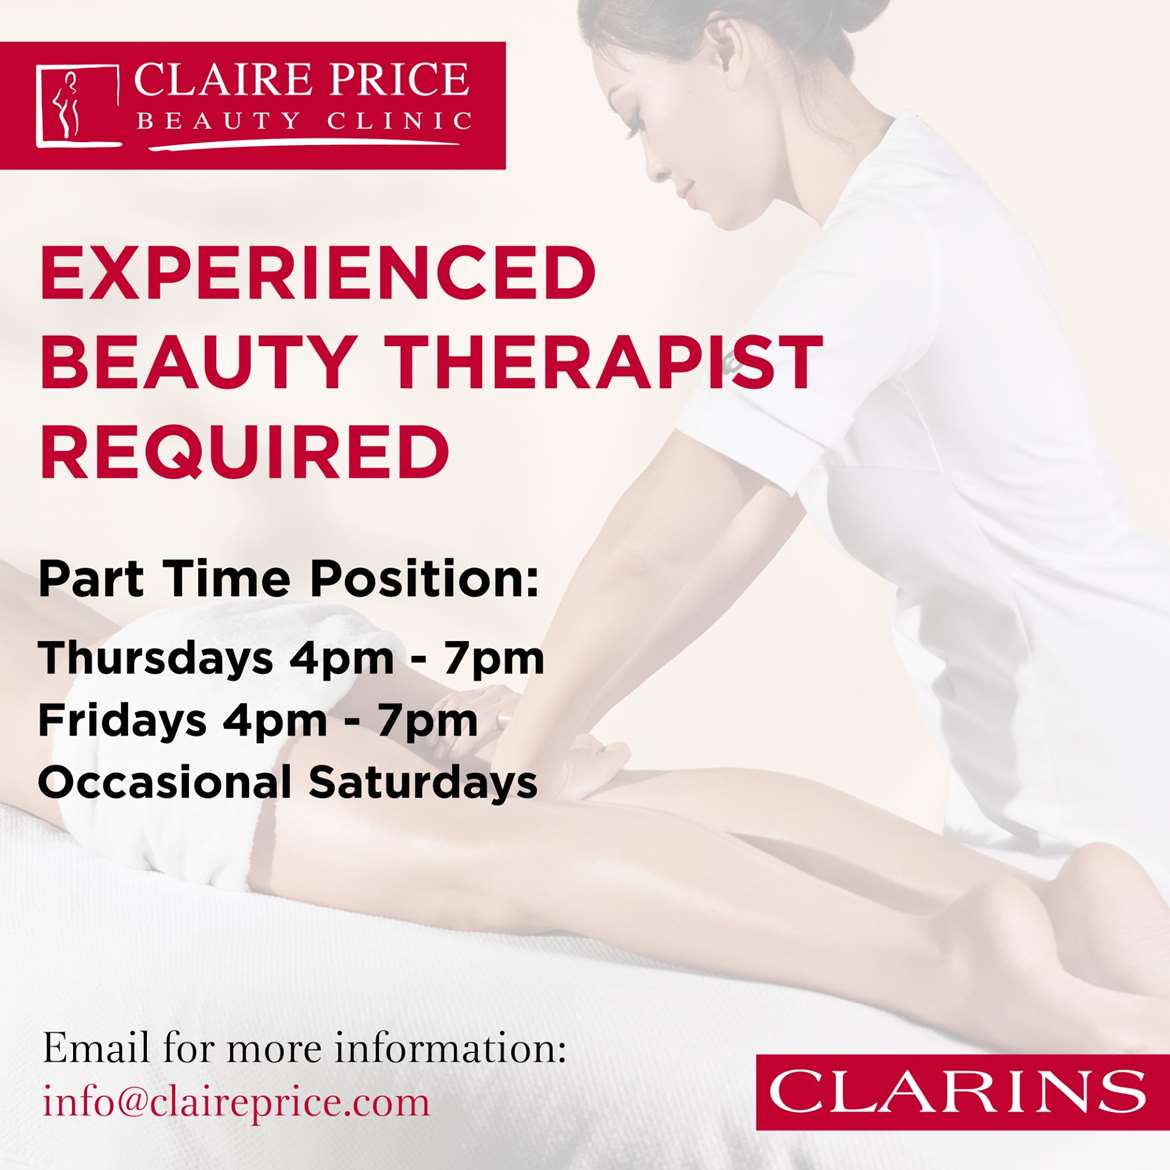 Experienced Beauty Therapist - Part-Time Position (Thursday 4-7, Friday 4-7, occasional Saturdays)